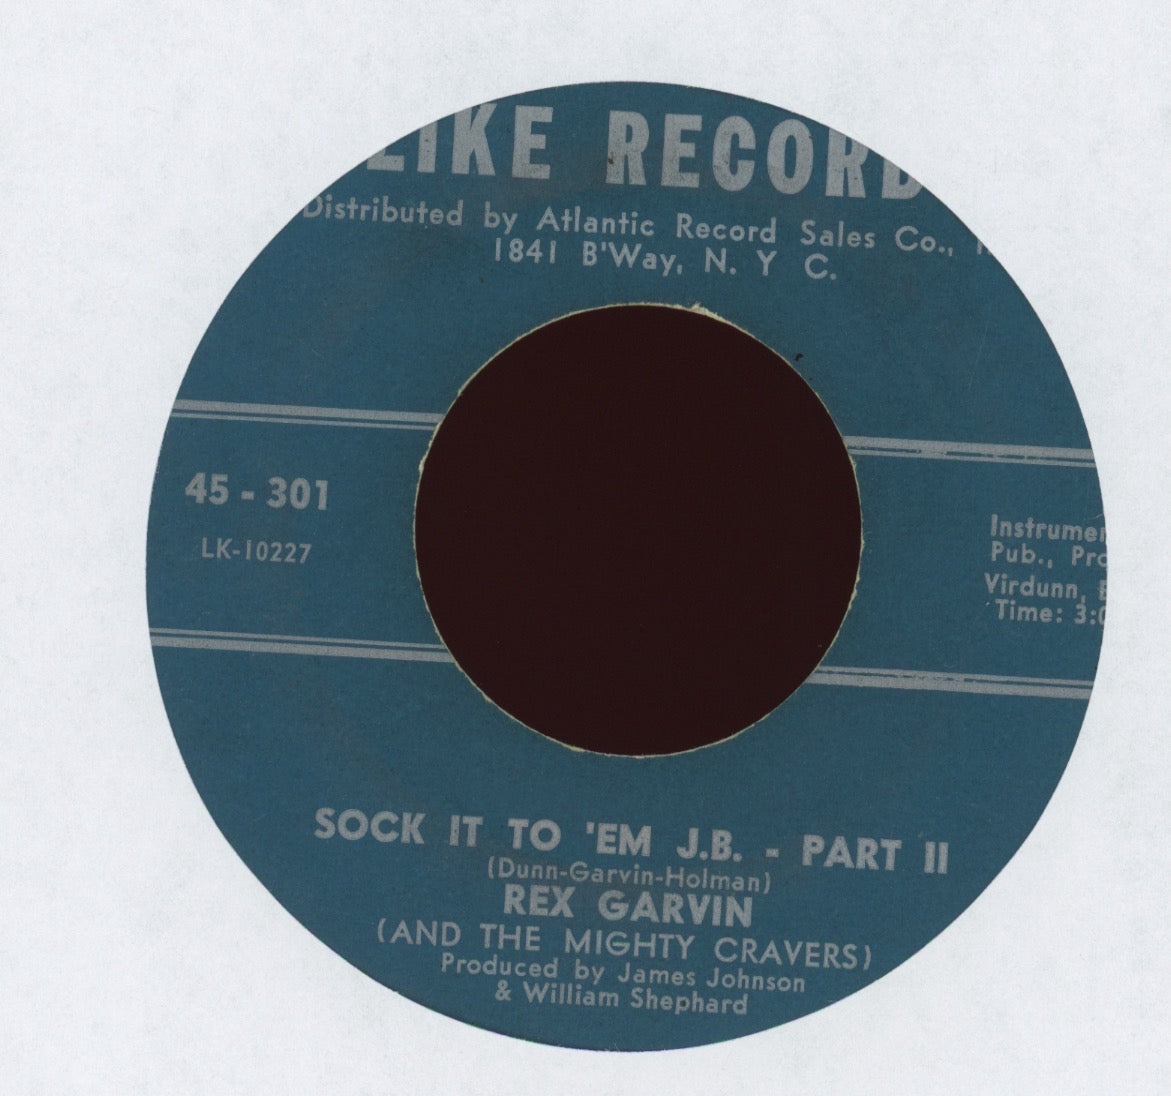 Rex Garvin & The Mighty Cravers - Sock It To 'Em J.B. on Like Northern Soul 45